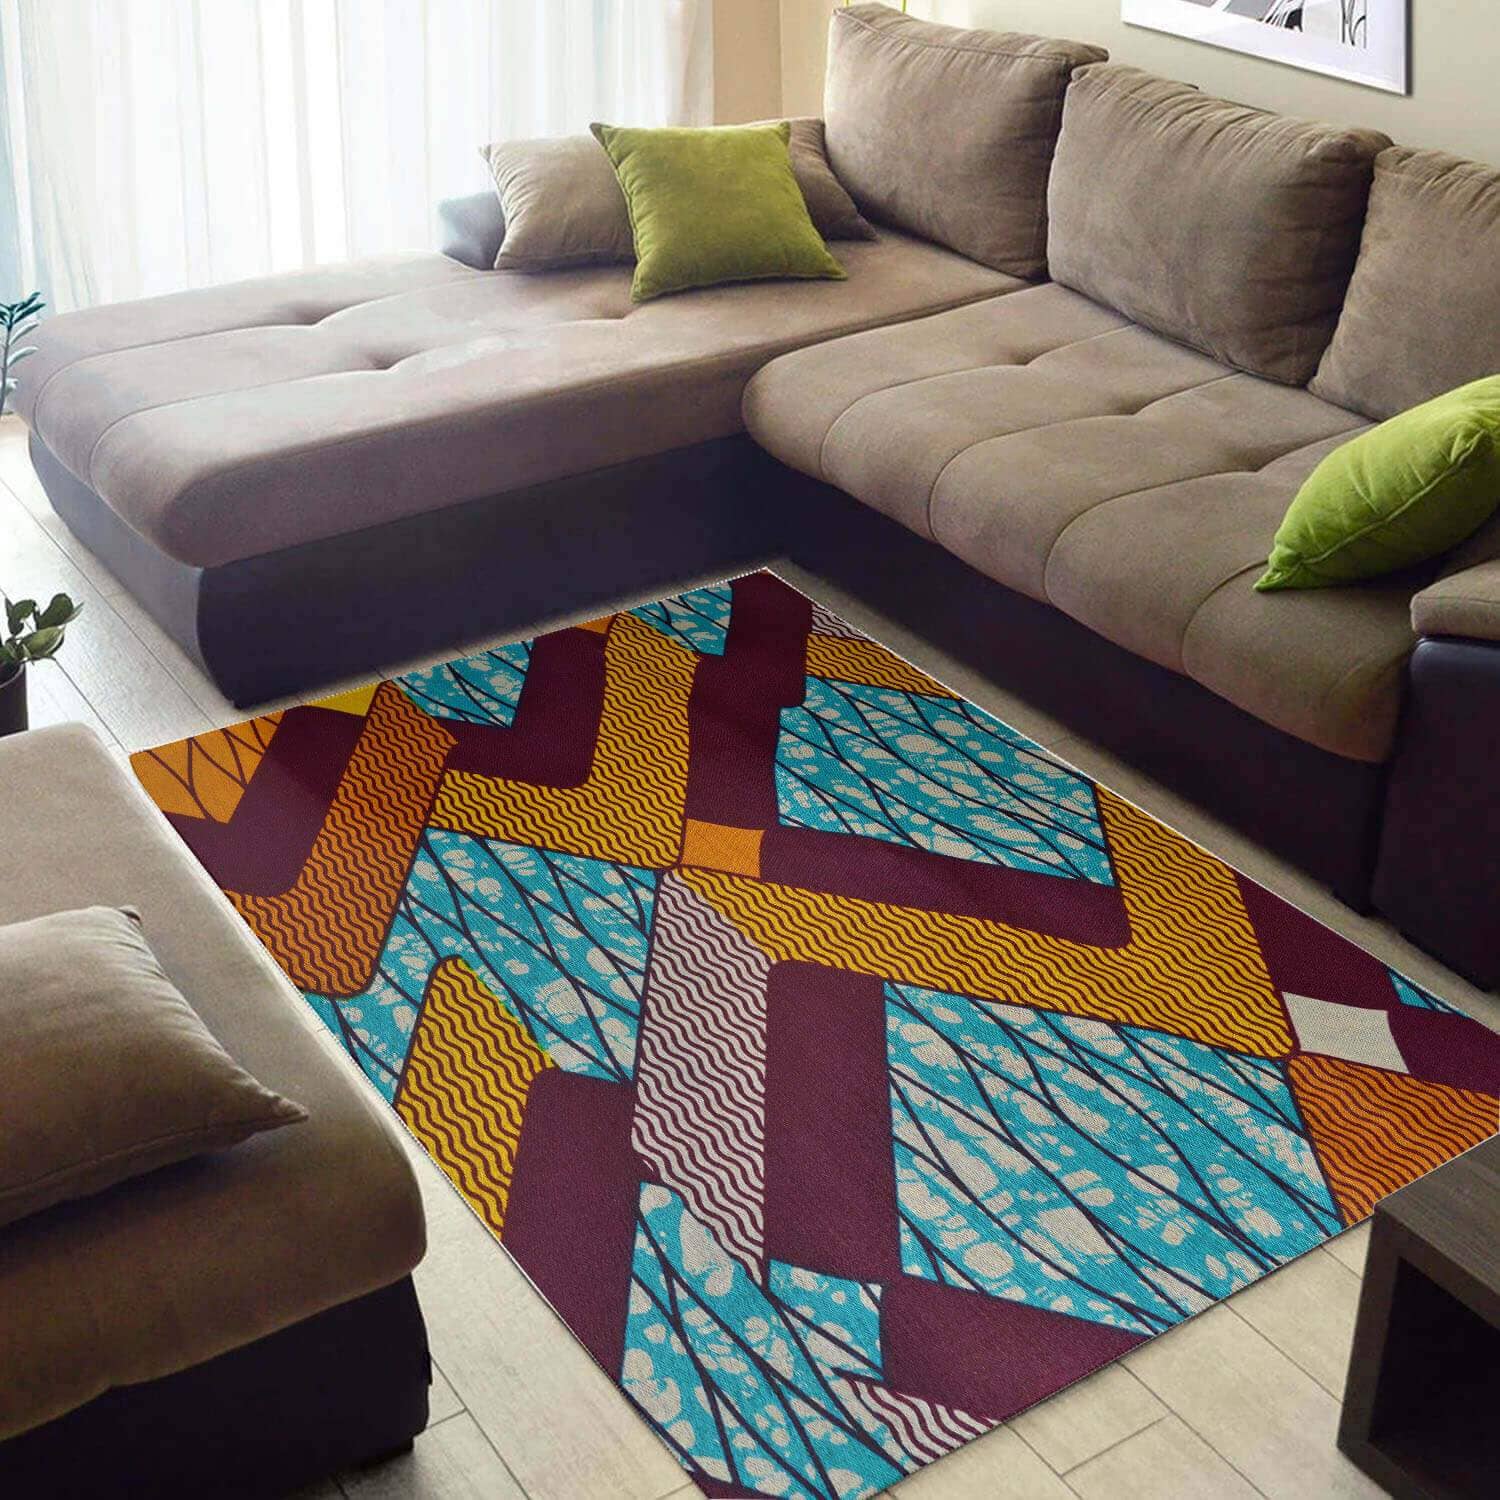 Cool African American Awesome Themed Ethnic Seamless Pattern Design Floor Carpet Inspired Living Room Rug